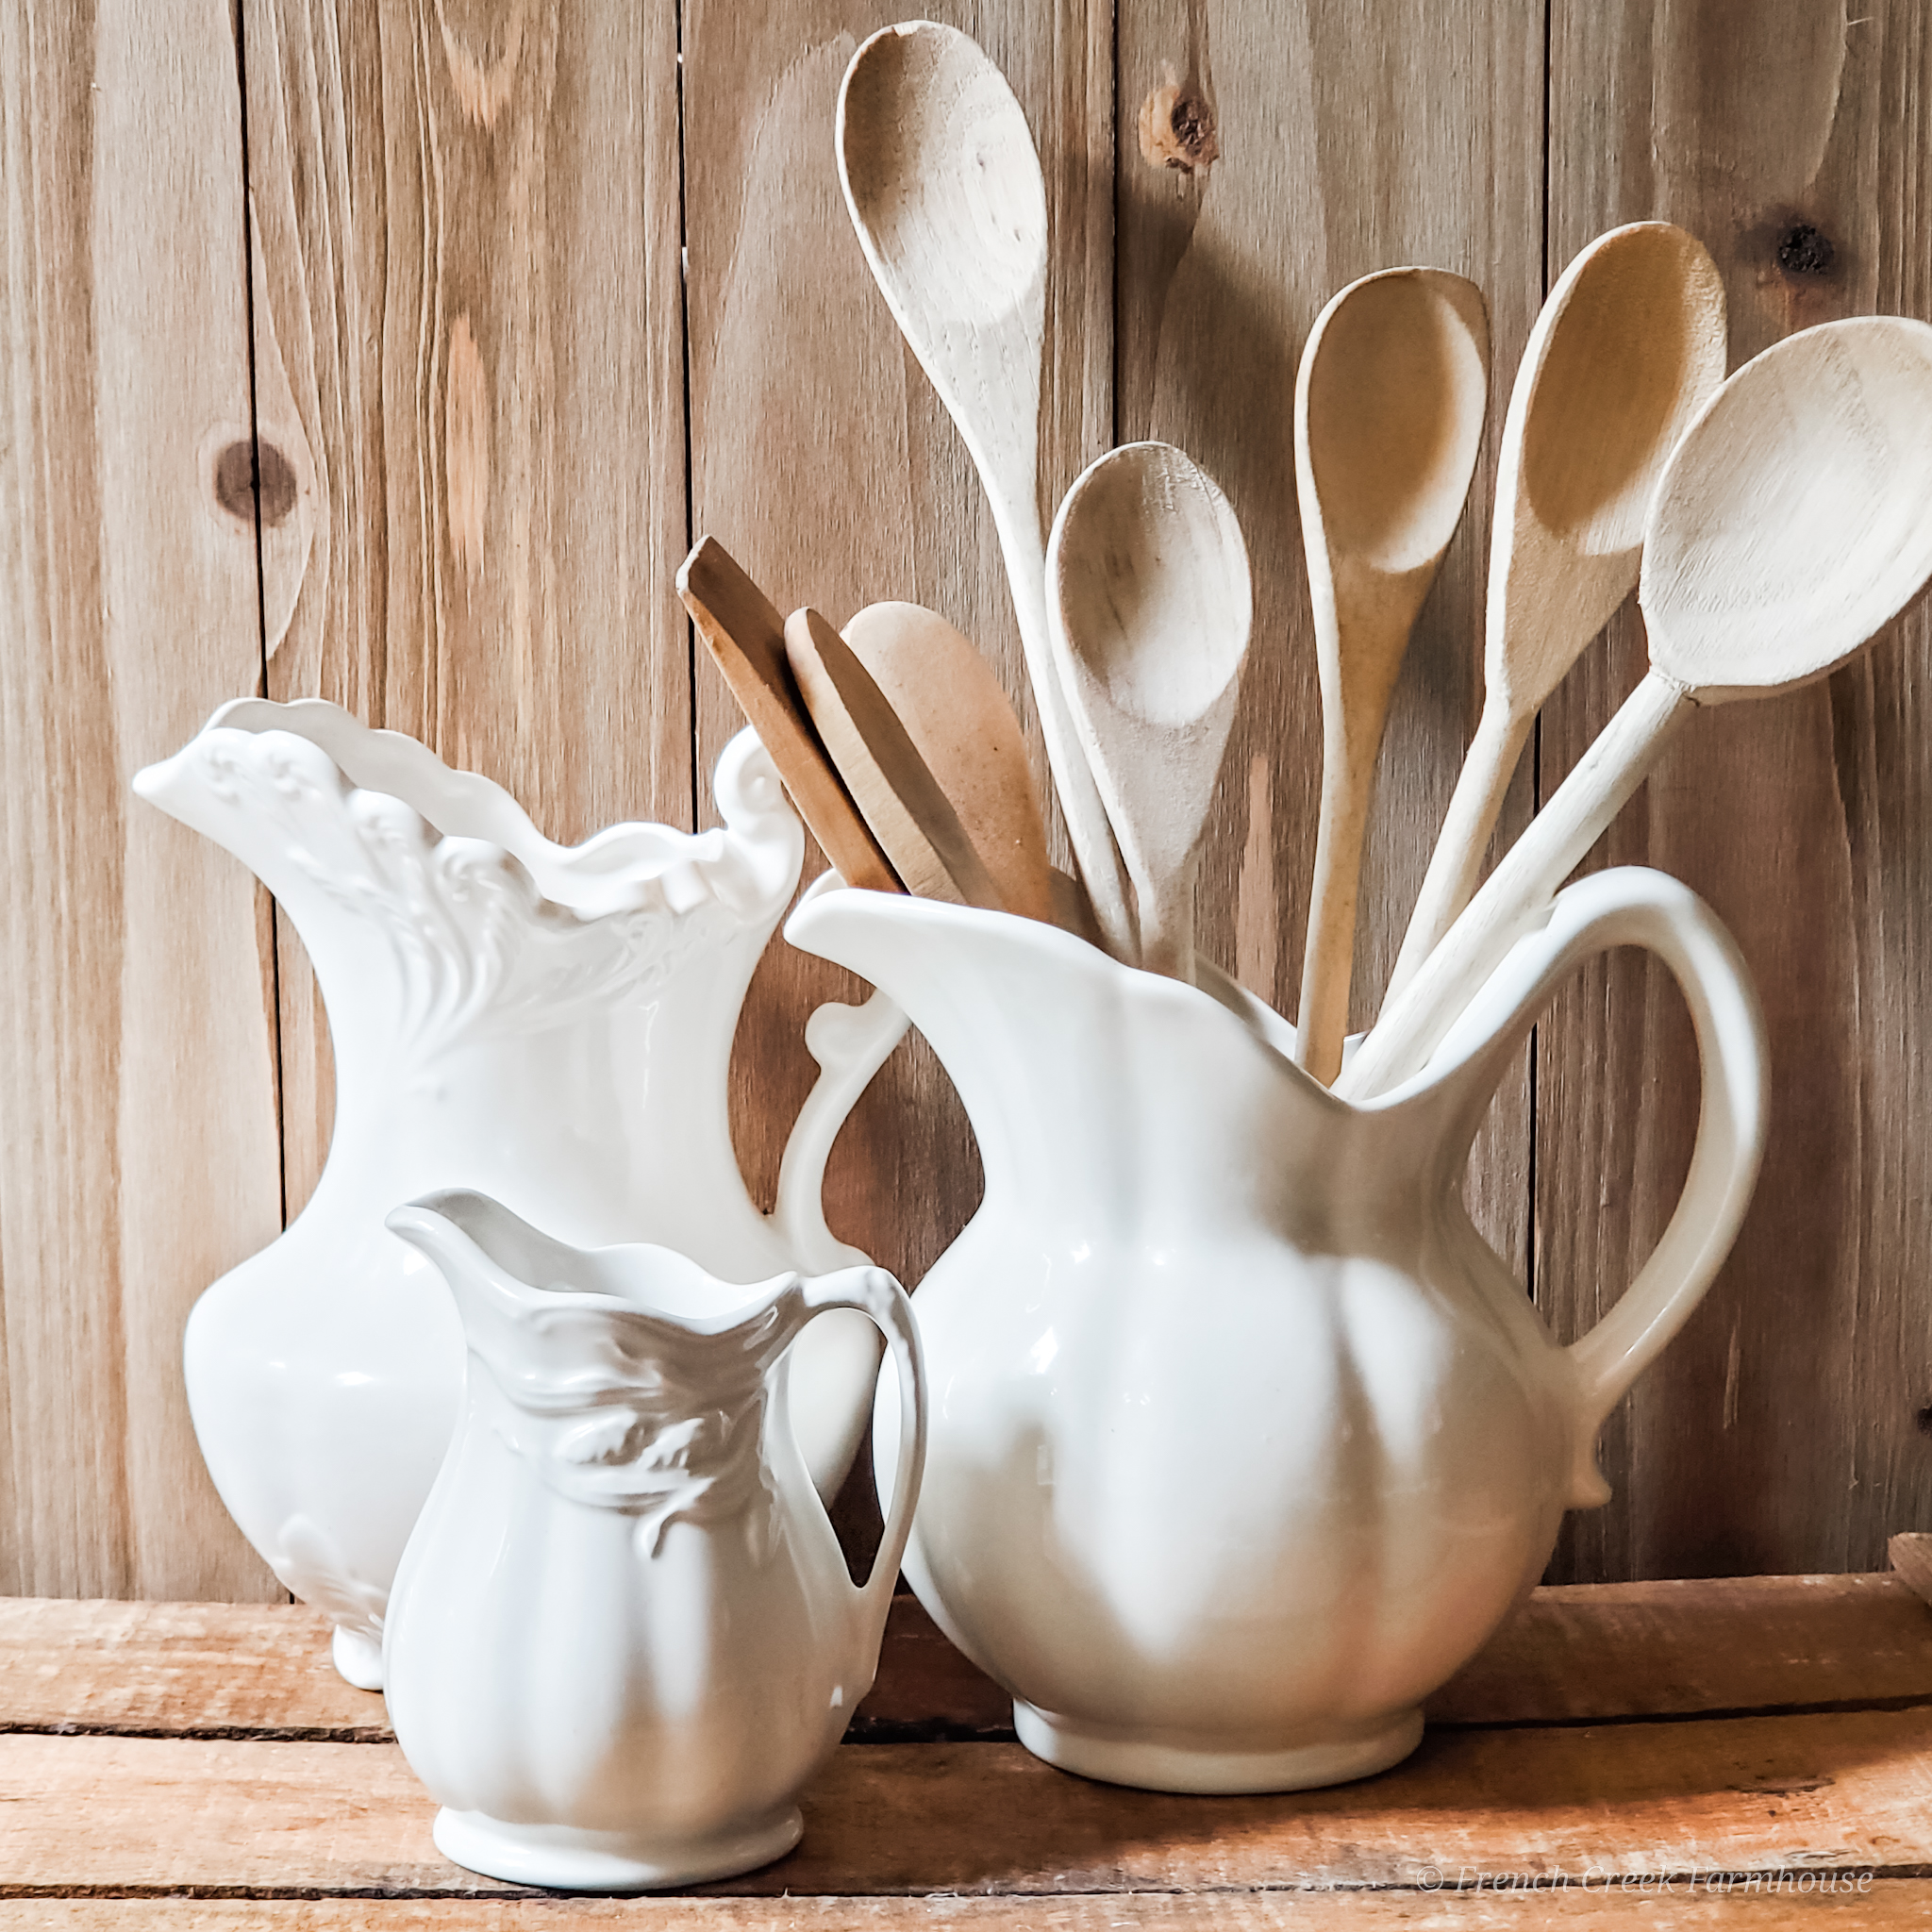 Focusing on woods and whites, this week's finds are perfect for your vintage farmhouse decor